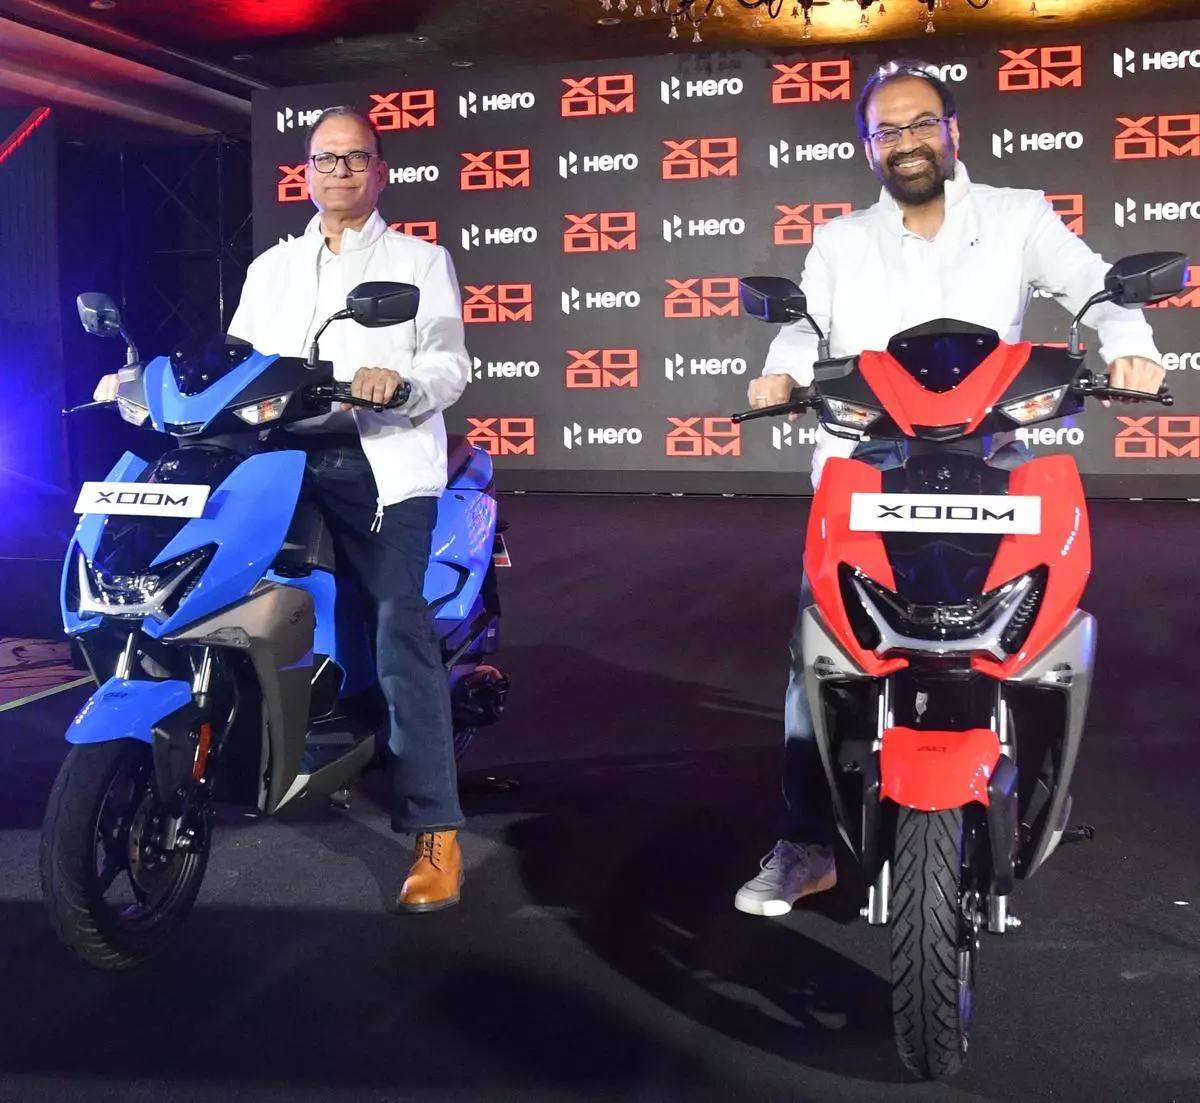 (from left) Arun Jaura, Chief Technology Officer, and Ranjivjit Singh, Chief Growth Officer, Hero Moto Corp, at the launch of Hero Xoom in Gurugram on Monday